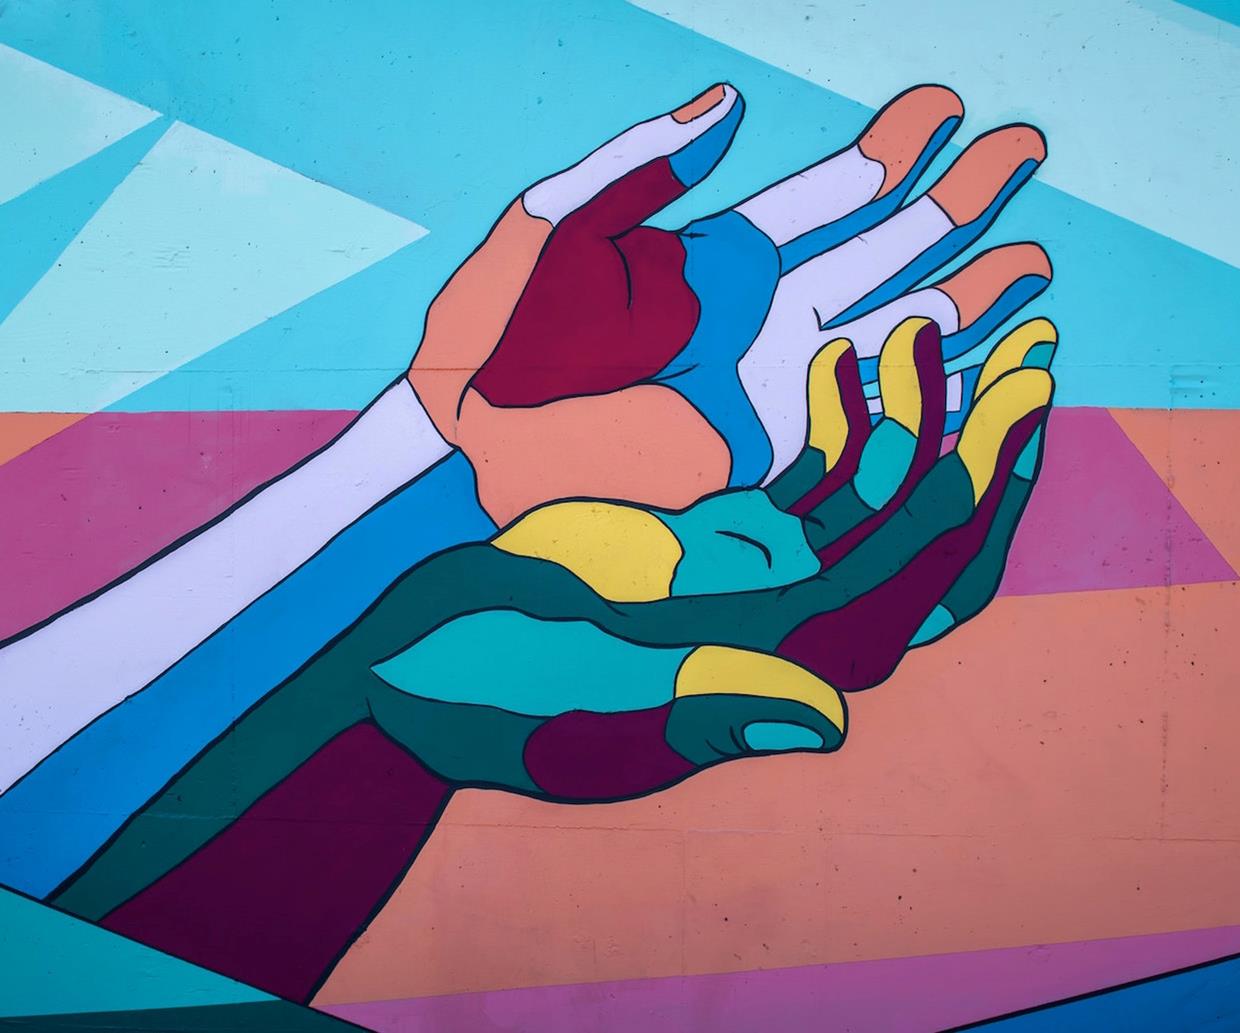 Illustrated colourful hands coming together